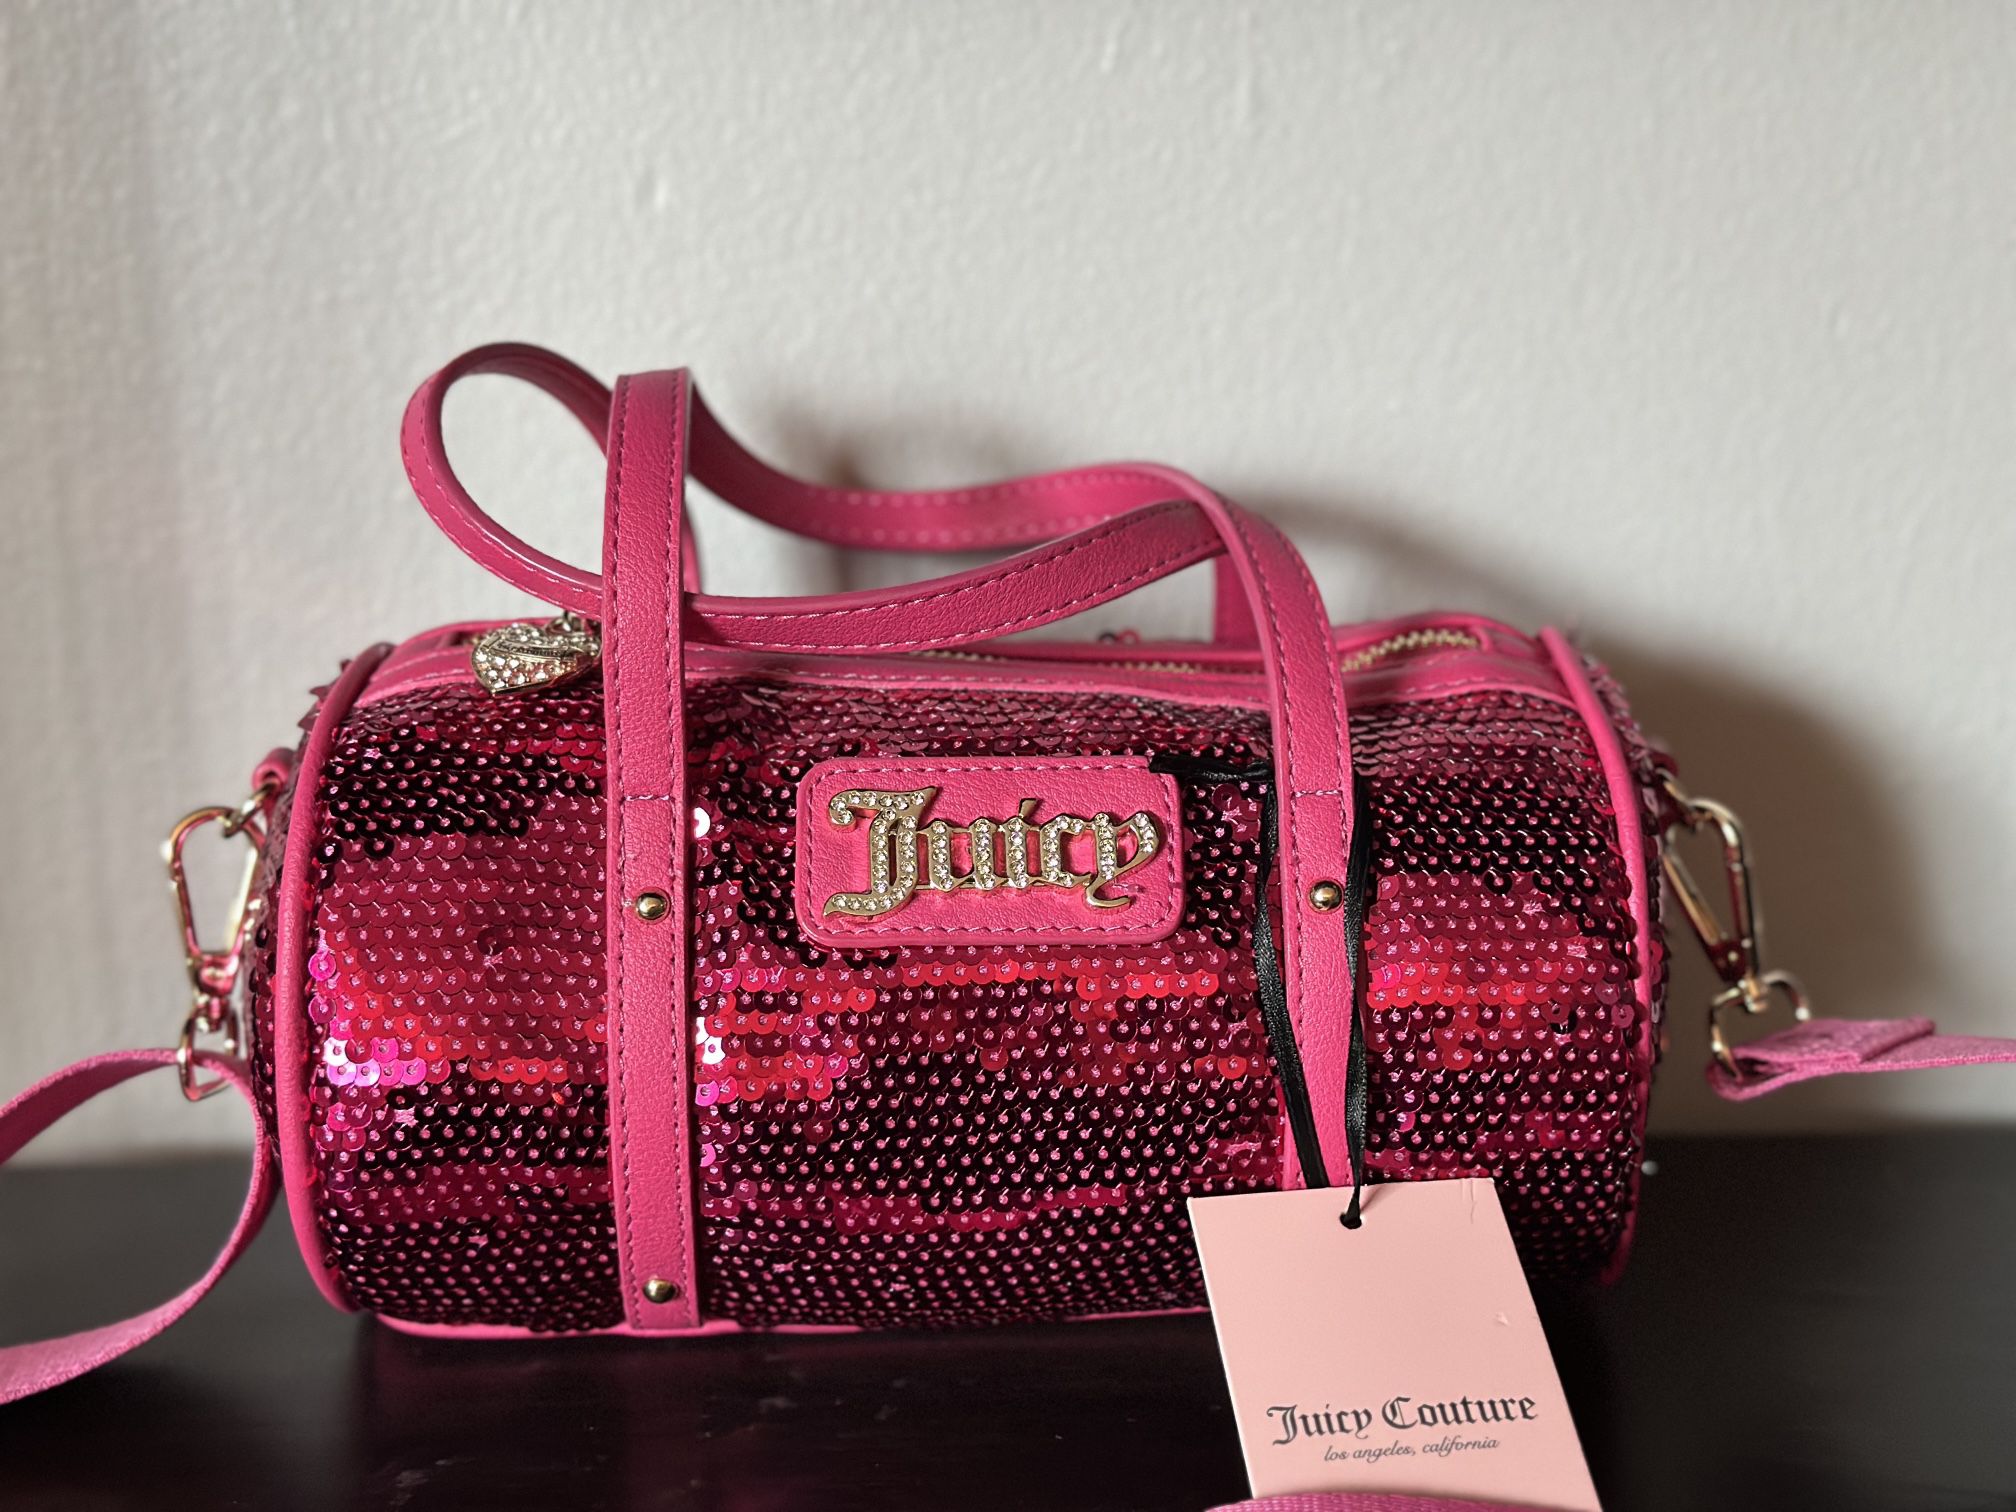 Juicy Couture Pink Purse 